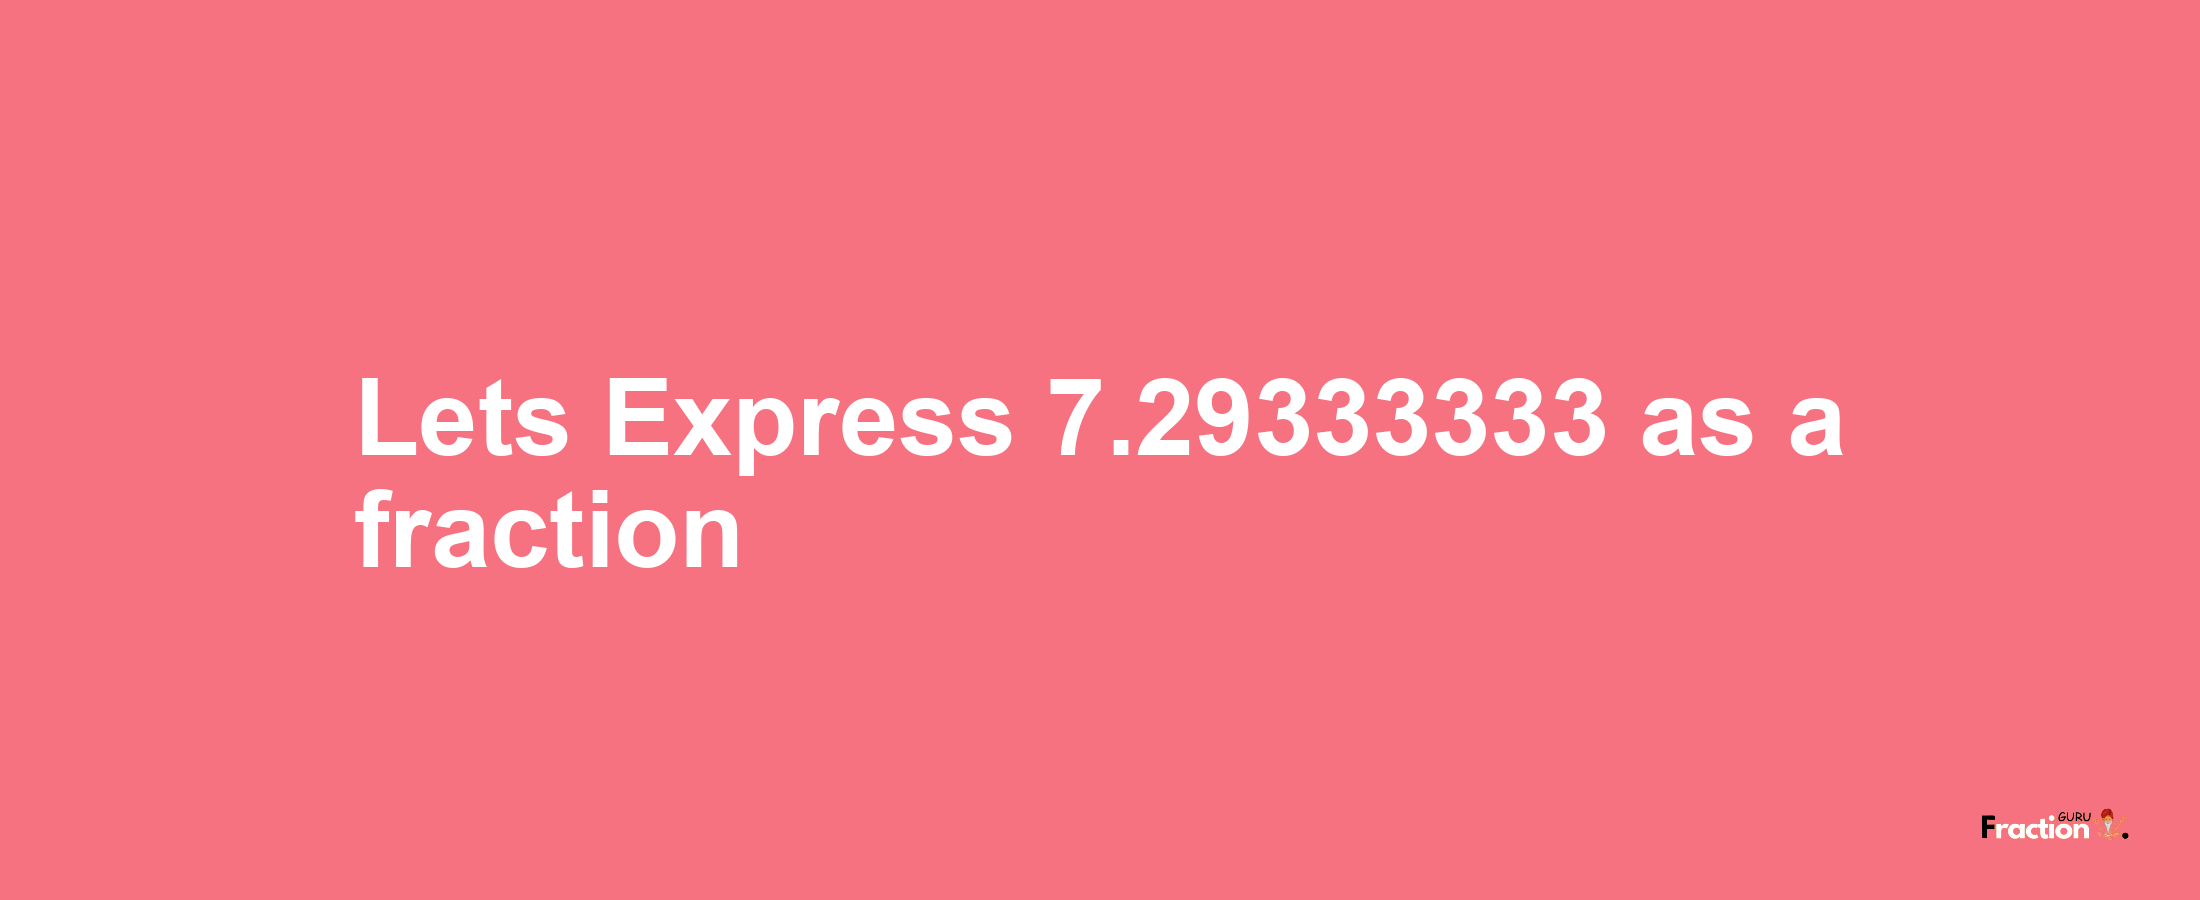 Lets Express 7.29333333 as afraction